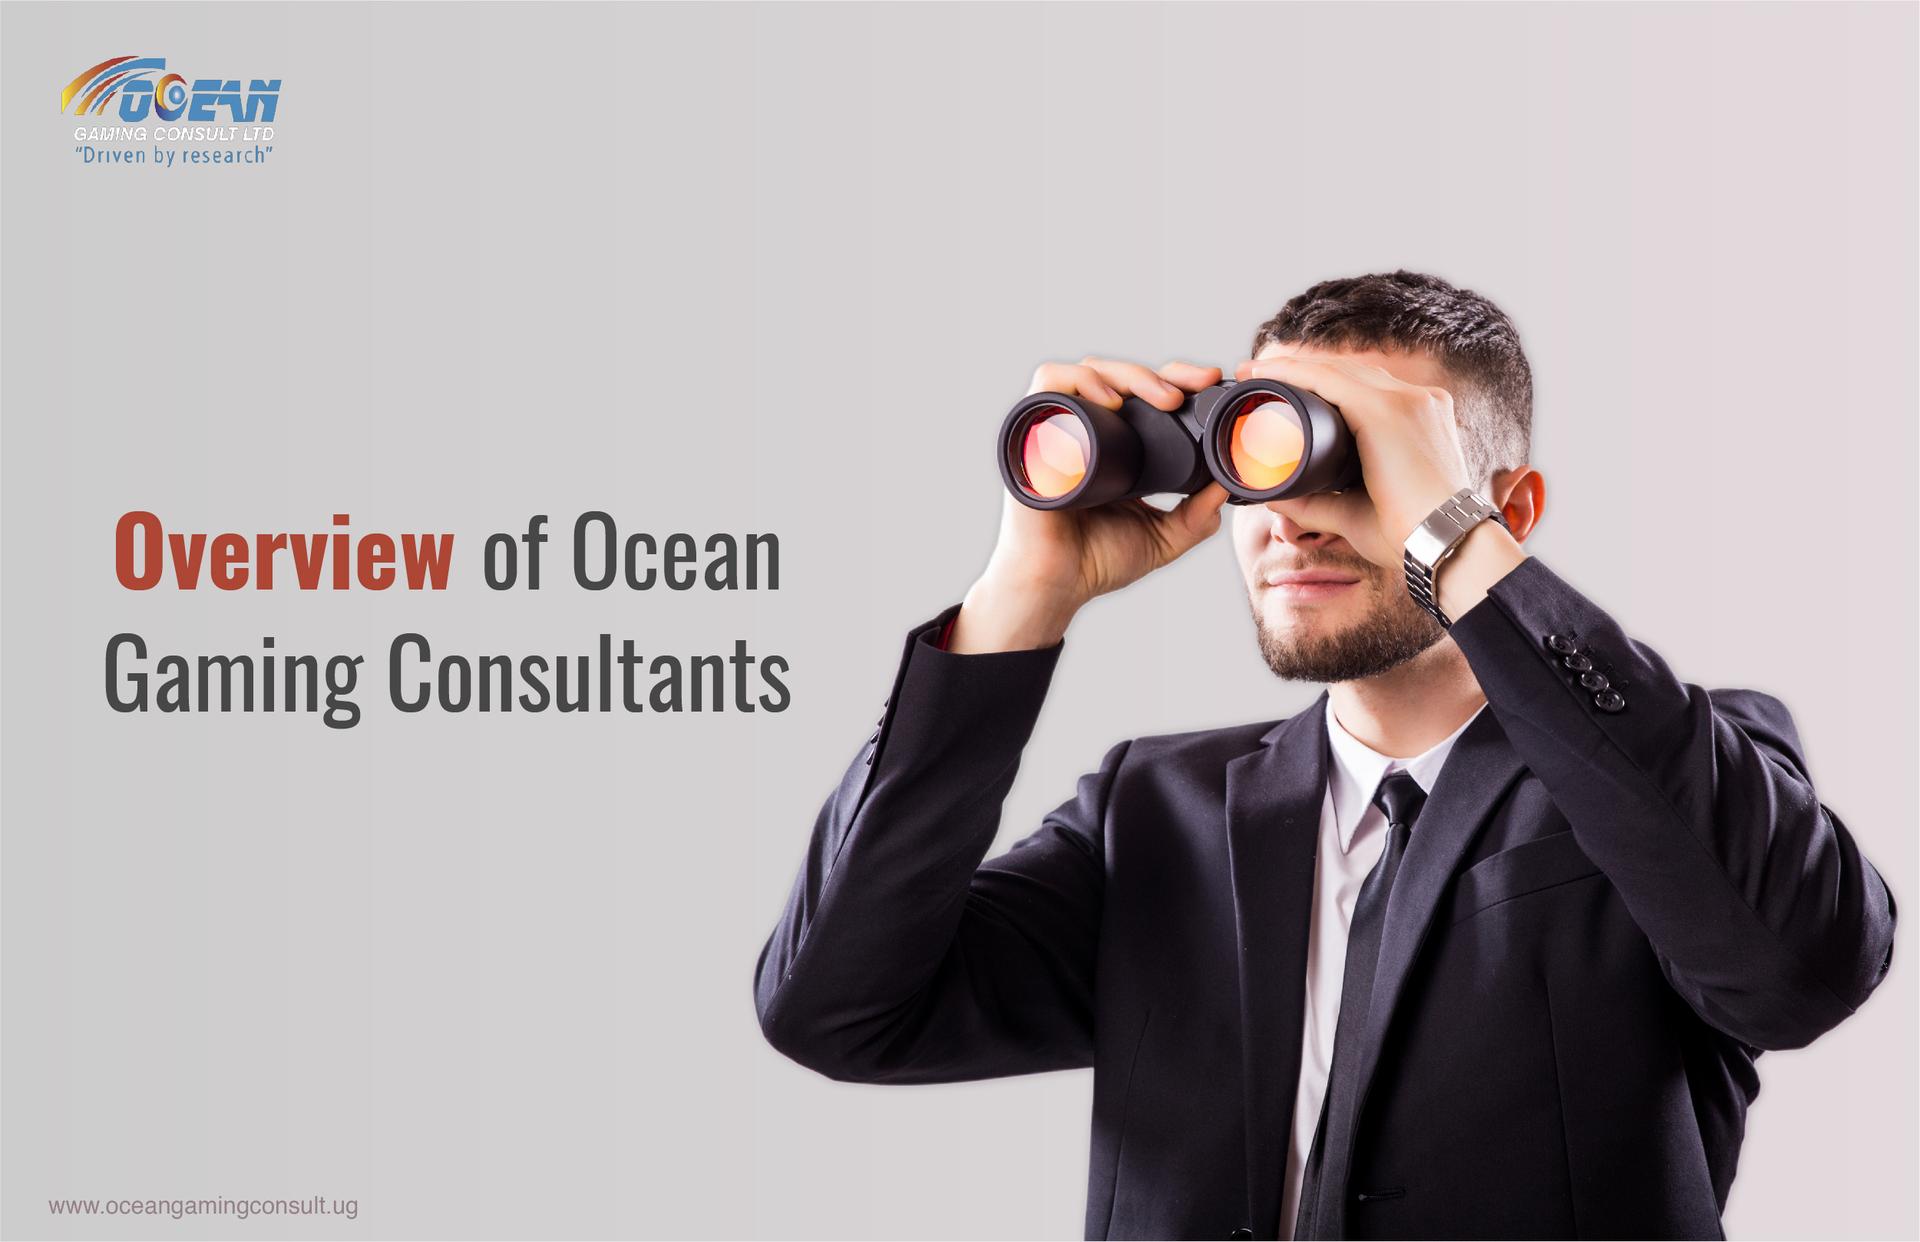 Overview of Leading Ocean Gaming Consultants